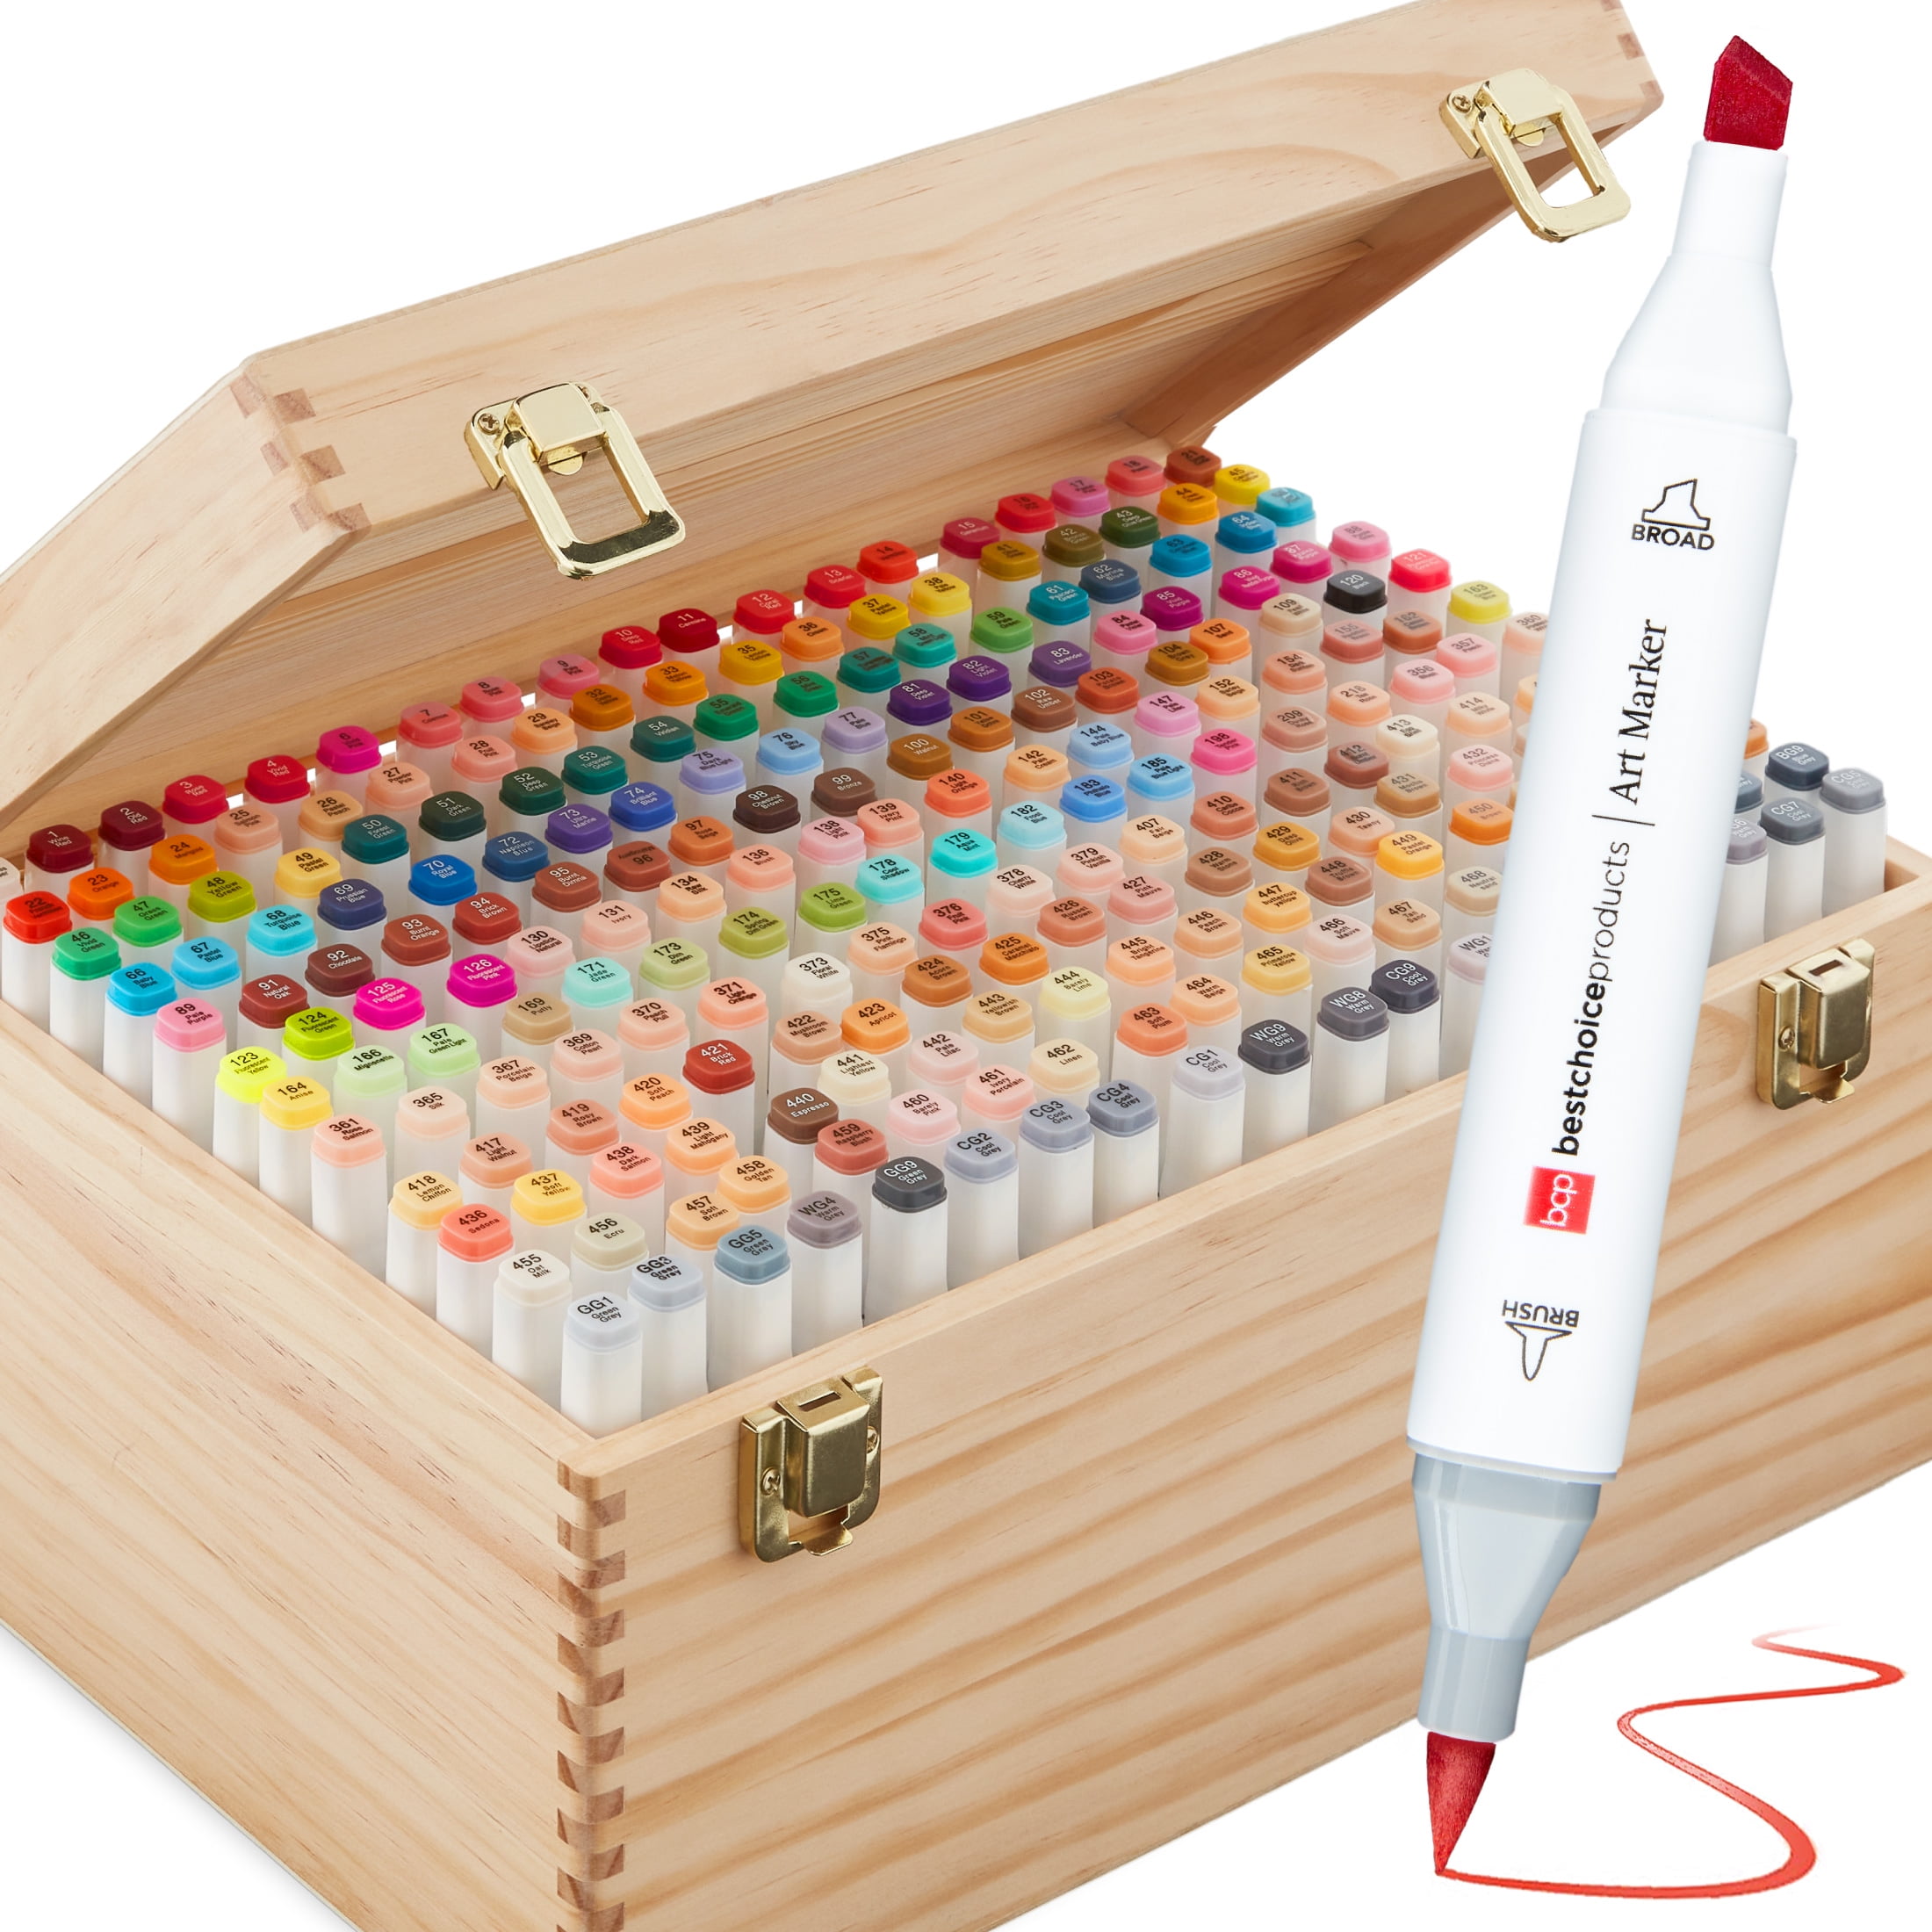 200 COLOUR ALCOHOL MARKERS - DOUBLE TIPPED CHISEL & FINE ALCOHOL, MULTICOLOR